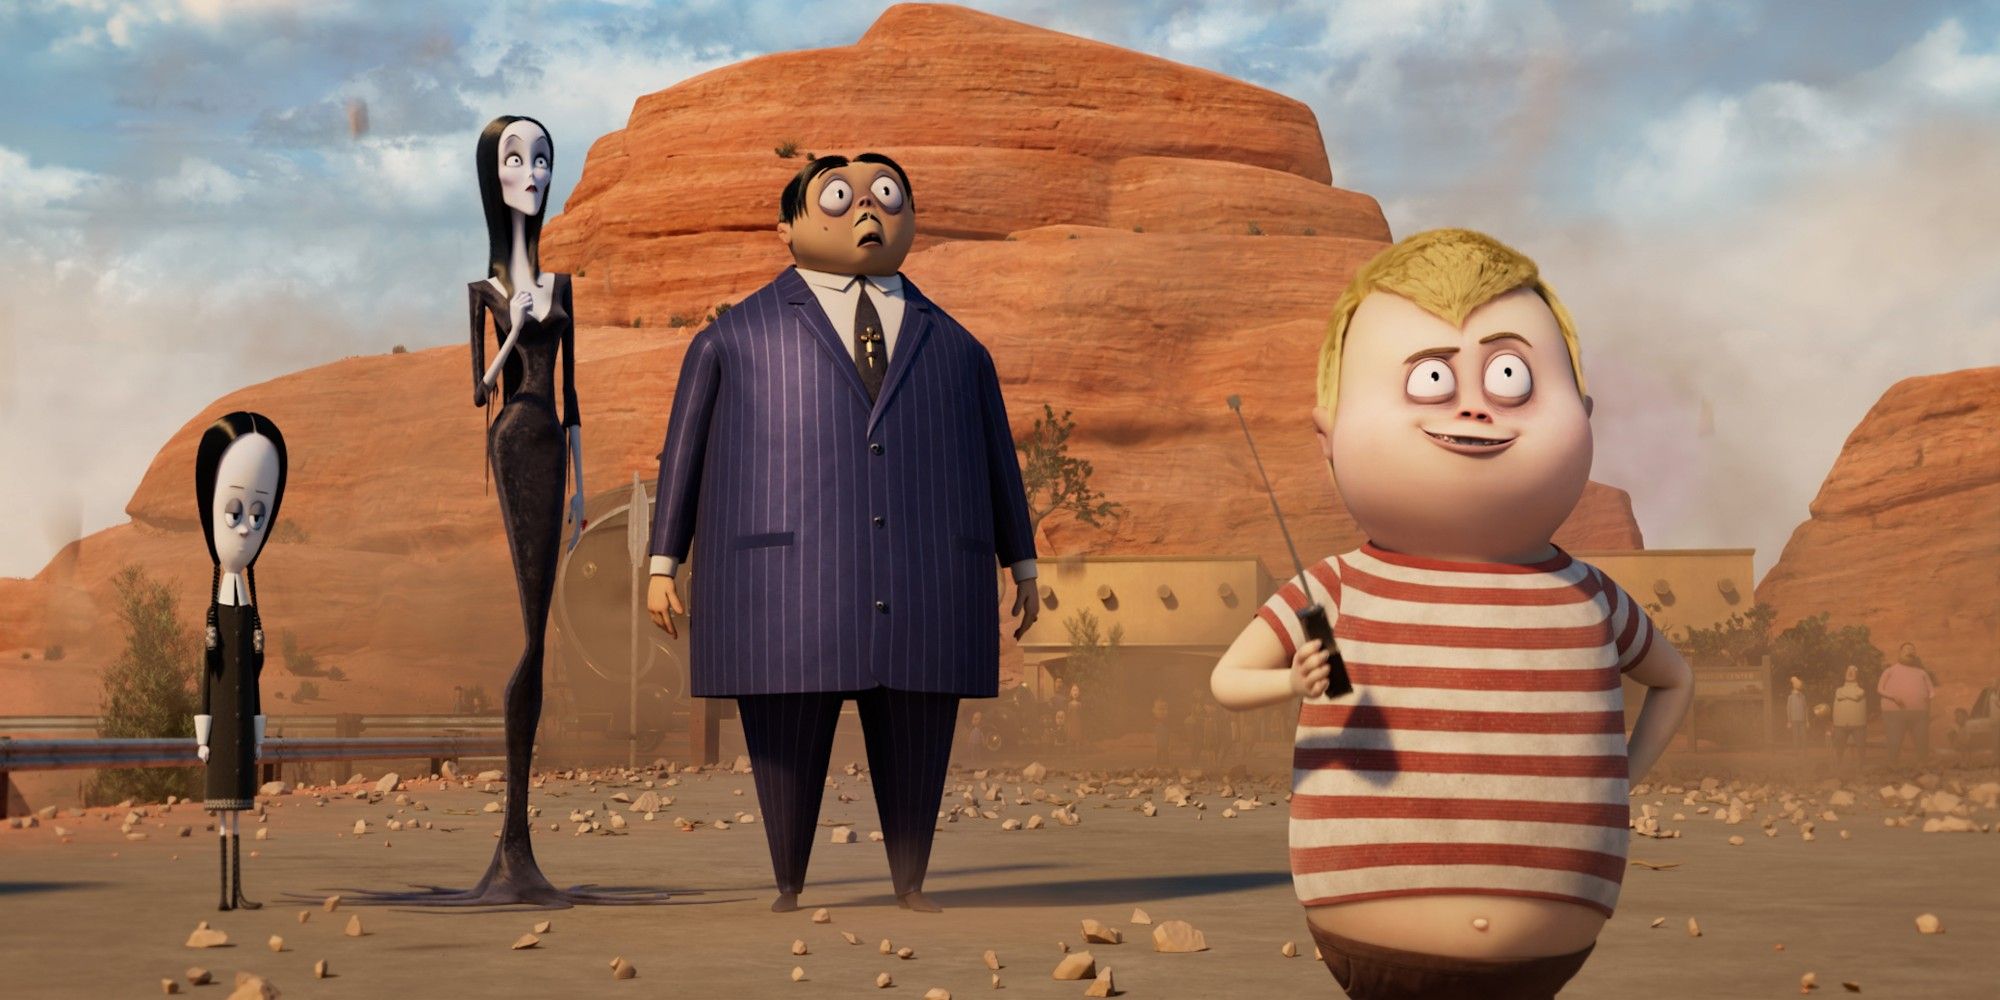 Wednesday, Morticia, Gomez and Pugsley stand in the desert in The Addams Family 2.